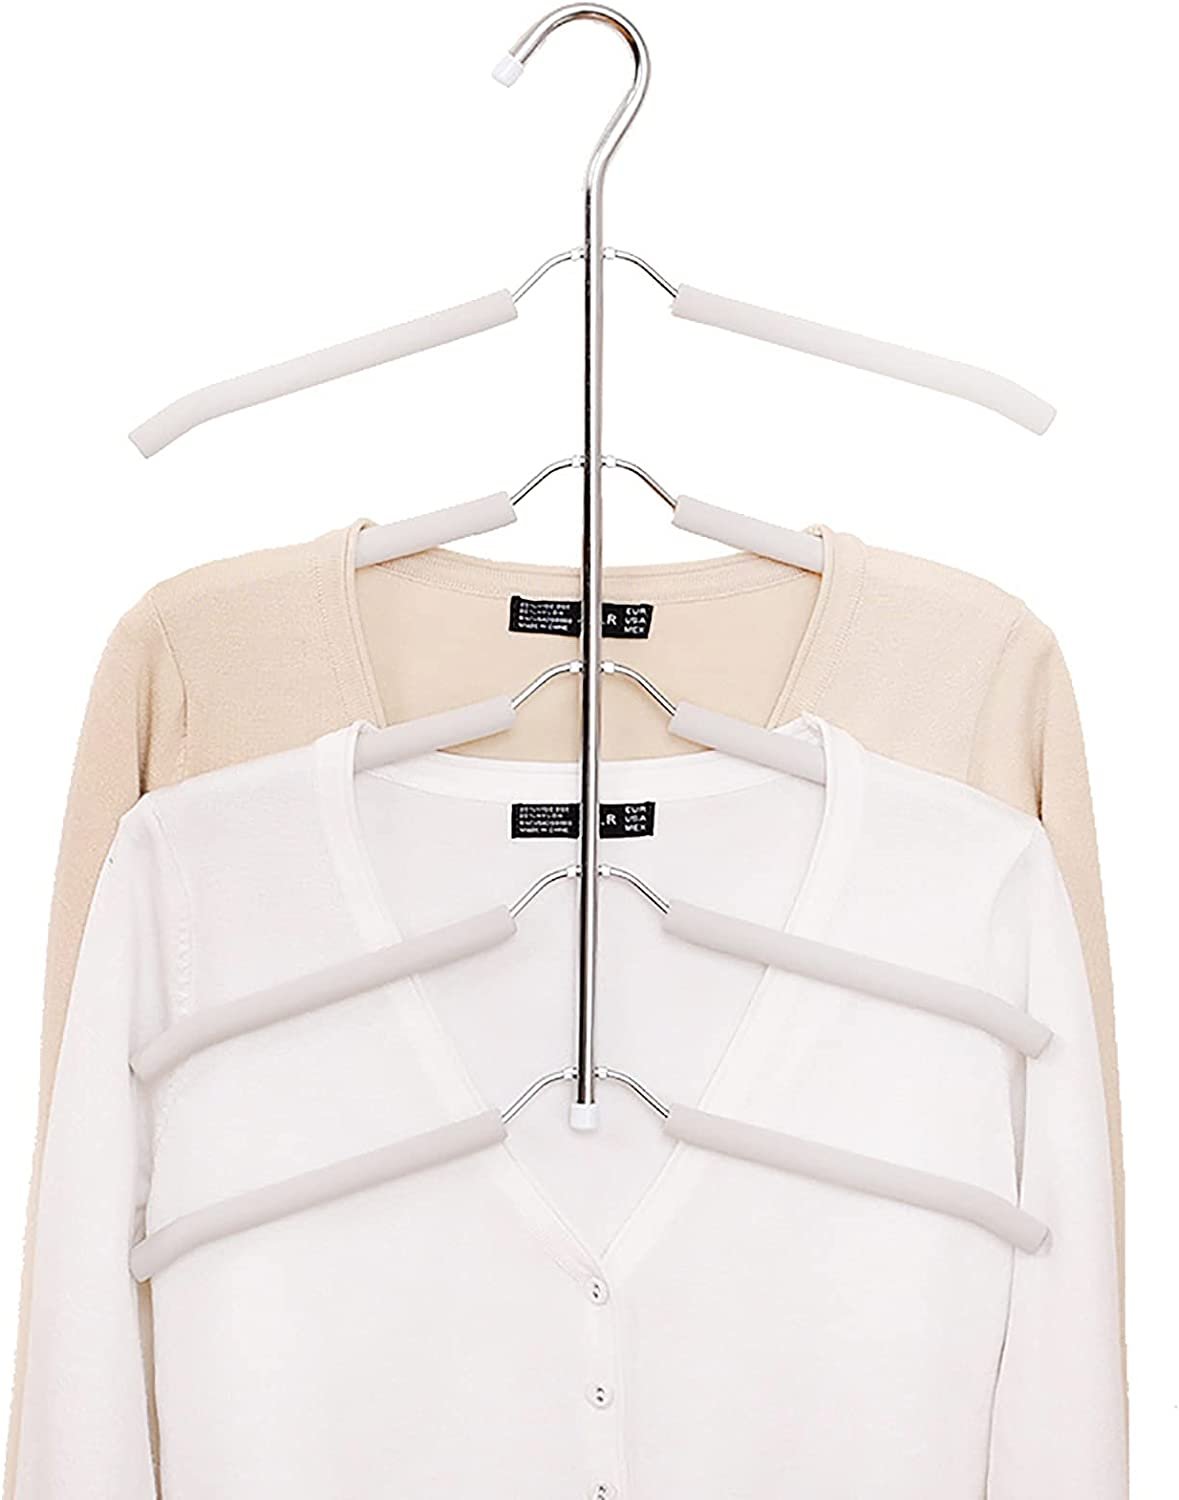 Multi-Layer Clothes Hangers